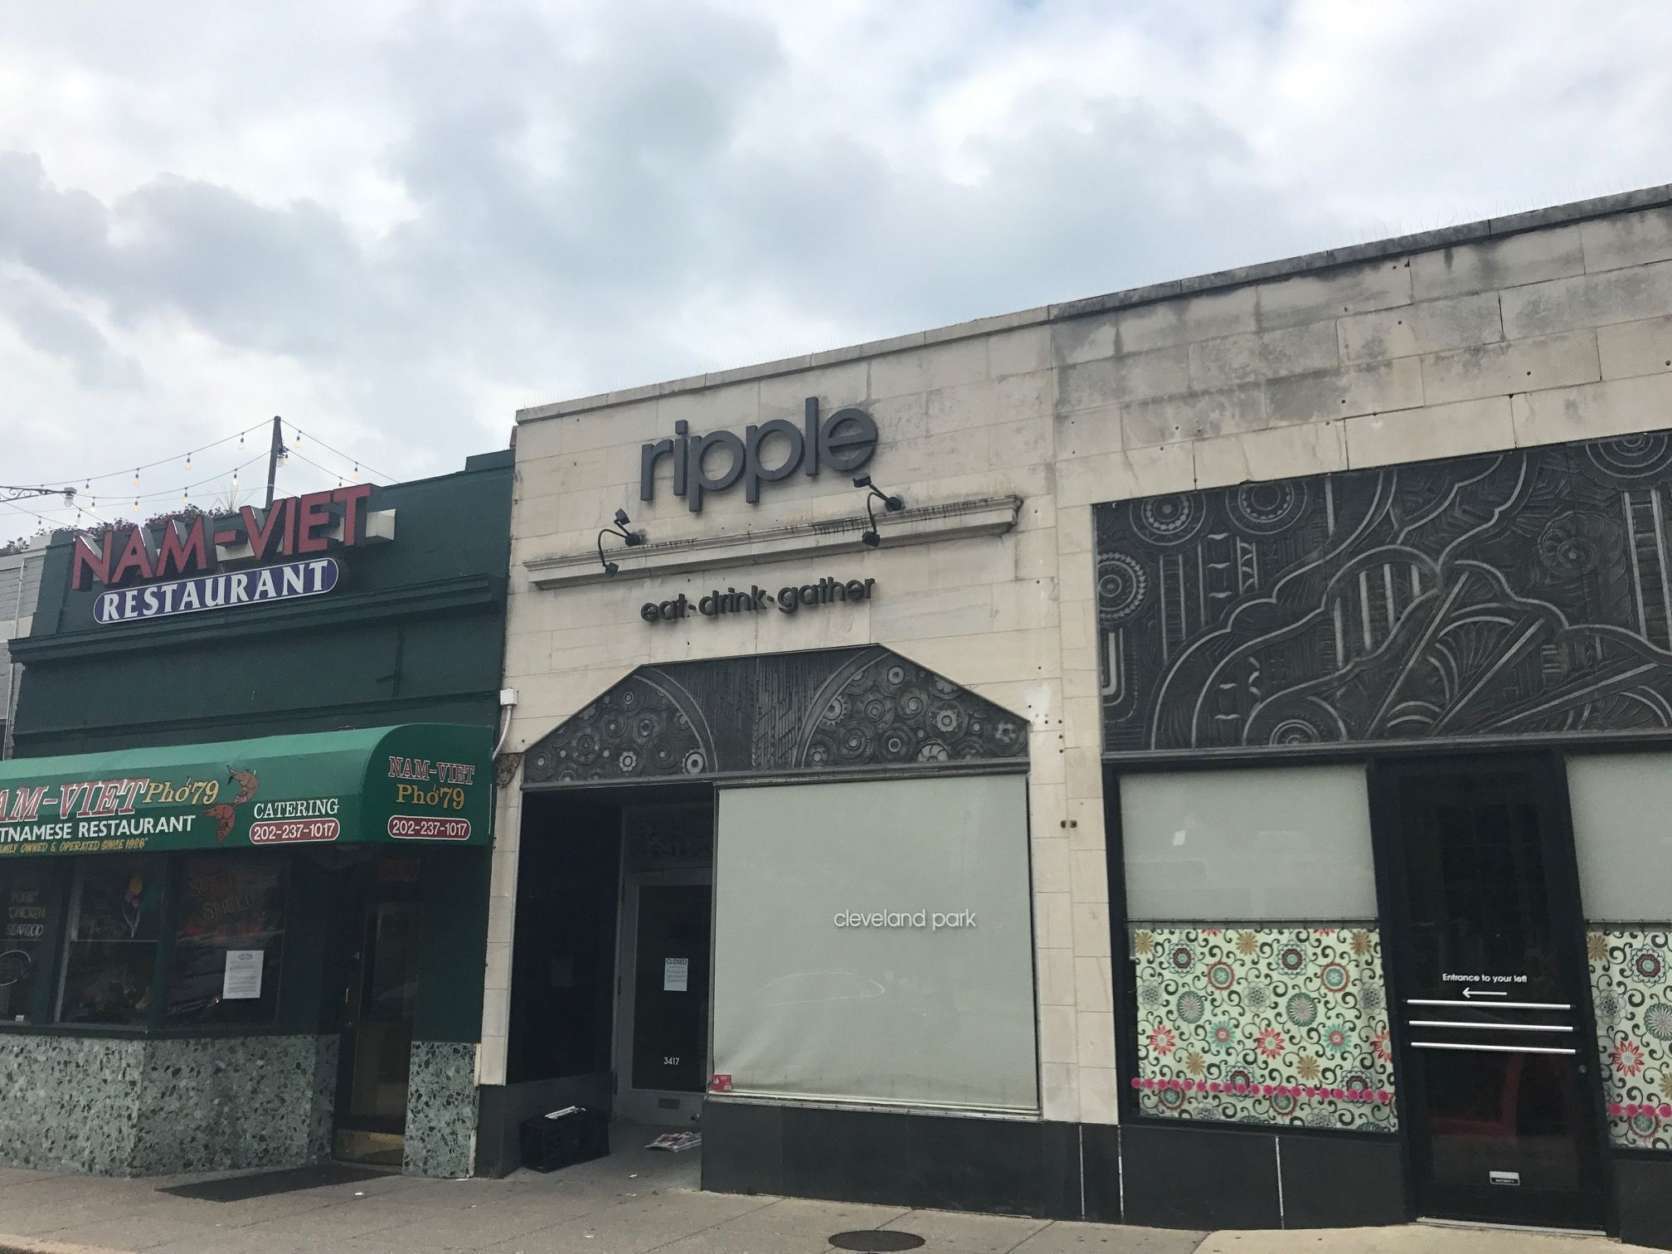 In June, 7-year-old Ripple and 20-year-old Nam-Viet closed their doors in D.C.'s Cleveland Park. In the last three years, several critically acclaimed dining establishments in the neighborhood have said "goodbye." (WTOP/Rachel Nania)